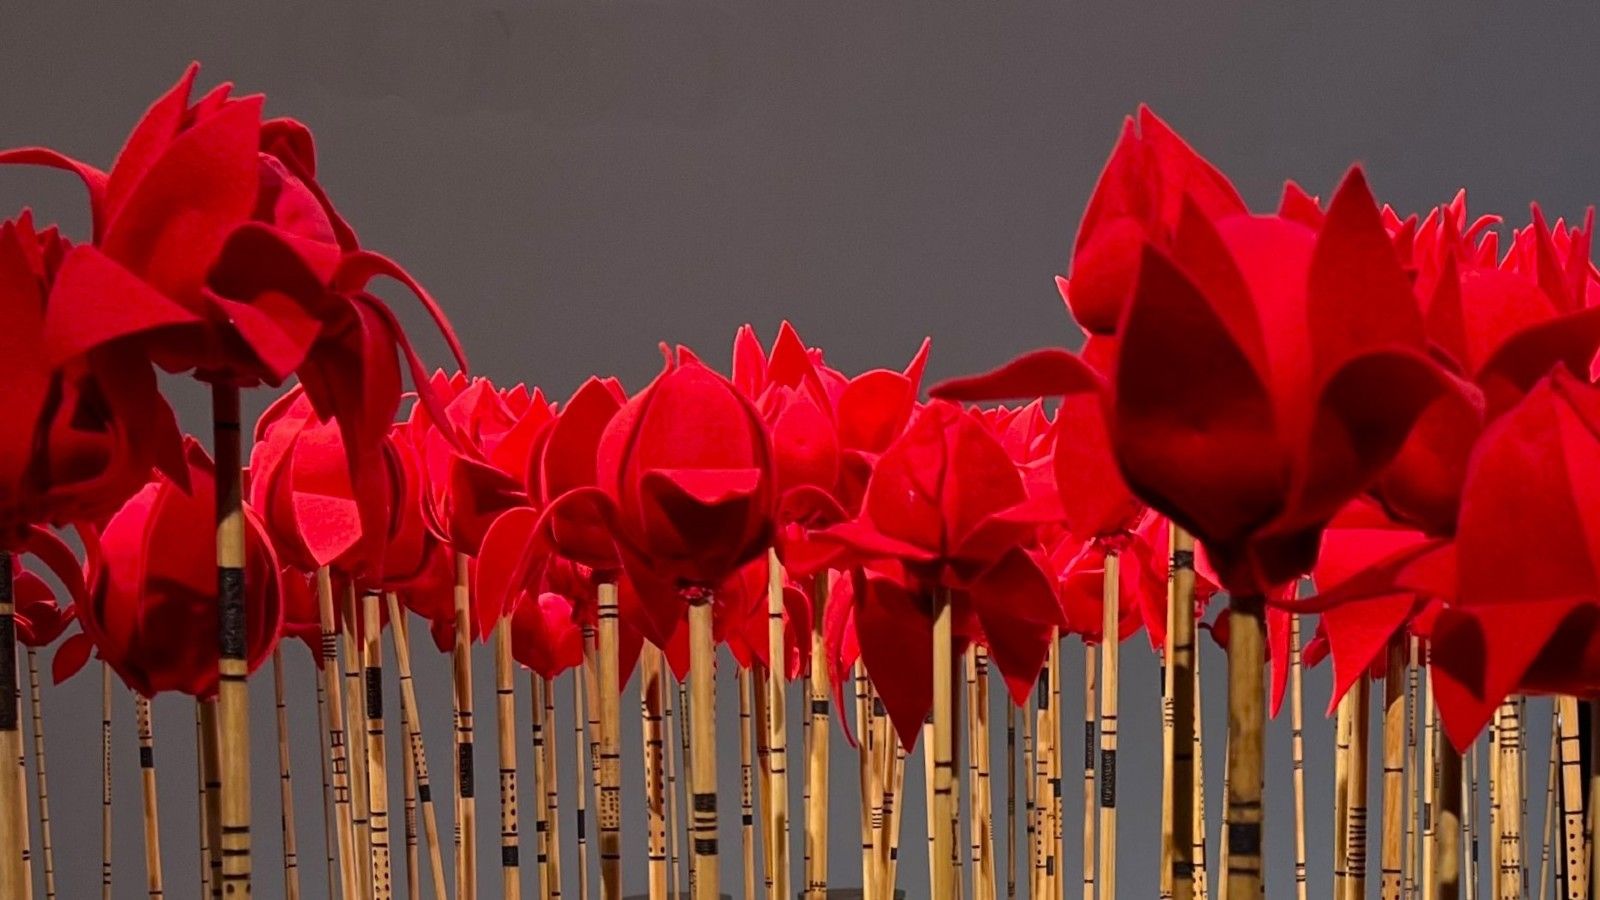 A collection of red felt flowers mounted on bamboo stakes. banner image